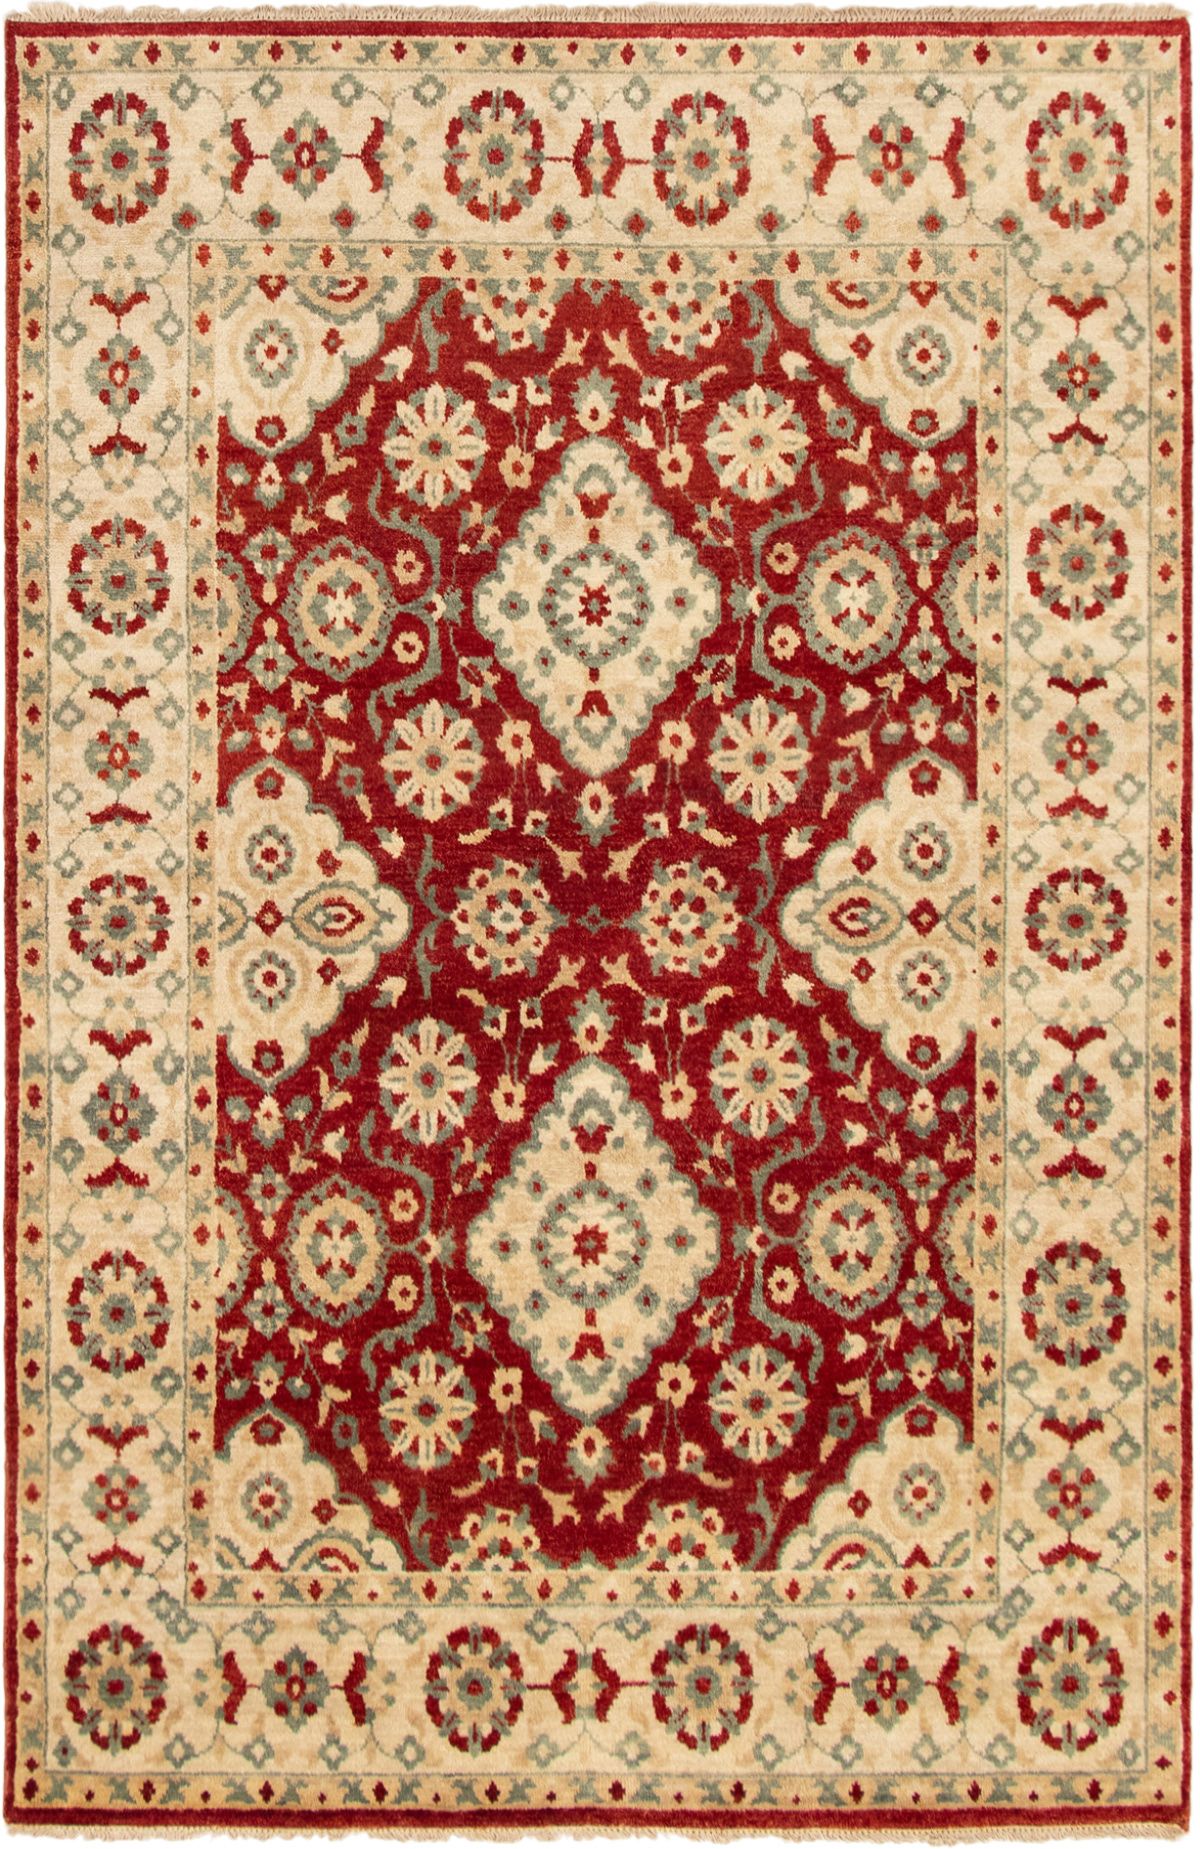 Hand-knotted Serapi Heritage Dark Red Wool Rug 5'10" x 8'10"  Size: 5'10" x 8'10"  